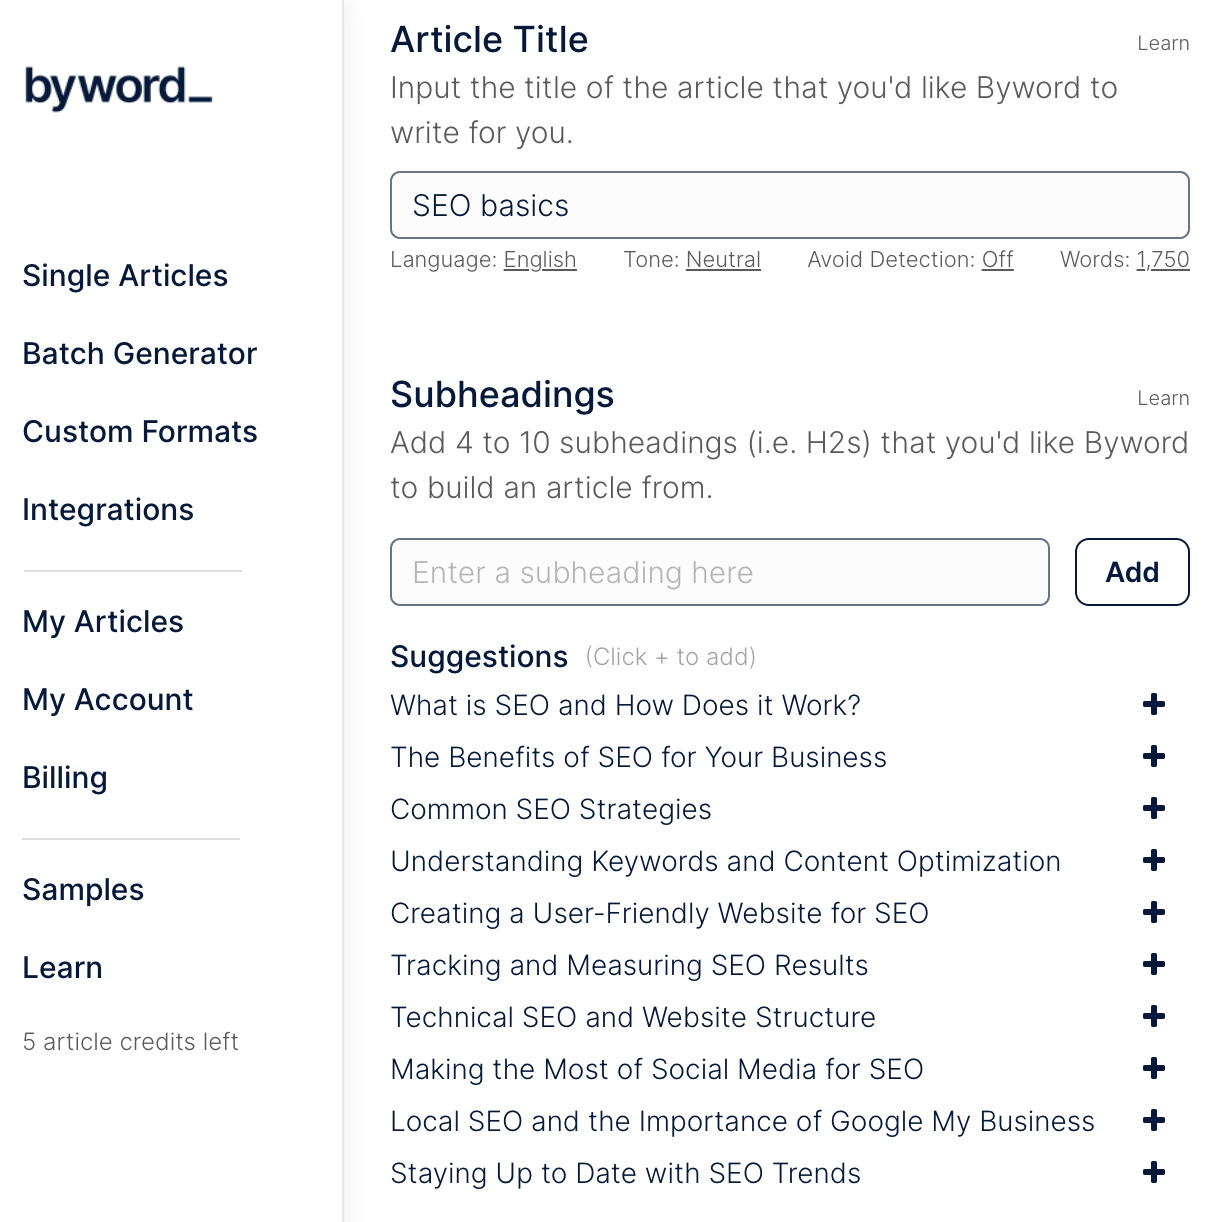 Subheadings related to SEO basics generated by Byword